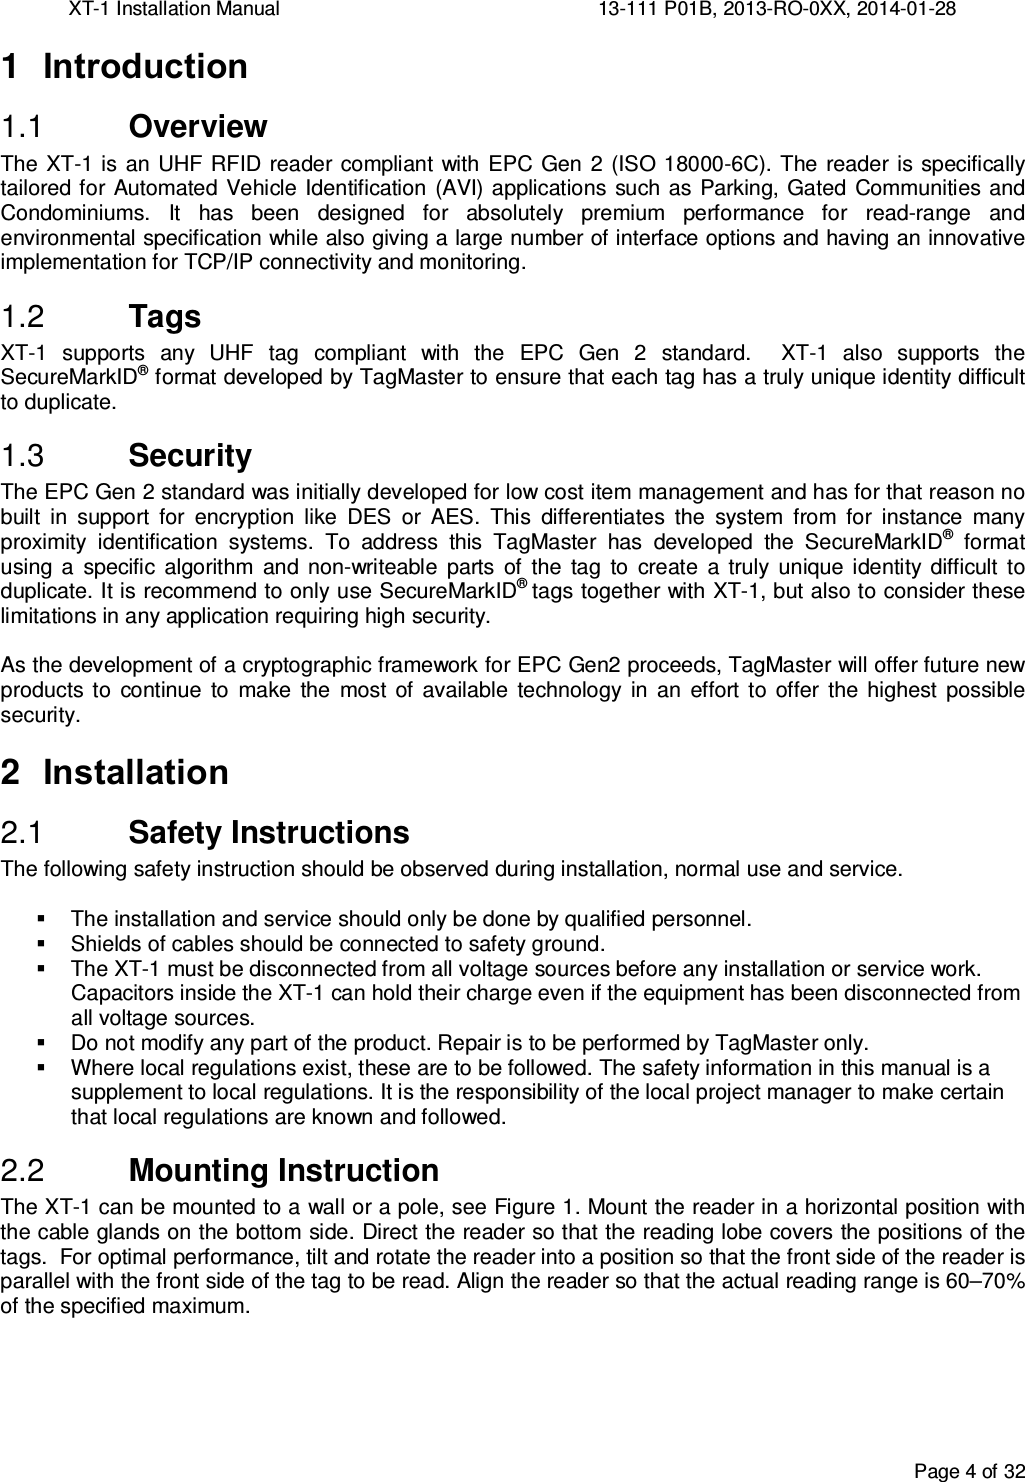 XT-1 Installation Manual     13-111 P01B, 2013-RO-0XX, 2014-01-28  Page 4 of 32  1  Introduction  Overview 1.1The  XT-1 is  an UHF RFID reader compliant with EPC  Gen  2 (ISO  18000-6C). The  reader is specifically tailored for  Automated  Vehicle  Identification (AVI) applications such as  Parking, Gated  Communities and Condominiums.  It  has  been  designed  for  absolutely  premium  performance  for  read-range  and environmental specification while also giving a large number of interface options and having an innovative implementation for TCP/IP connectivity and monitoring.  Tags 1.2XT-1  supports  any  UHF  tag  compliant  with  the  EPC  Gen  2  standard.    XT-1  also  supports  the SecureMarkID® format developed by TagMaster to ensure that each tag has a truly unique identity difficult to duplicate.  Security 1.3The EPC Gen 2 standard was initially developed for low cost item management and has for that reason no built  in  support  for  encryption  like  DES  or  AES.  This  differentiates  the  system  from  for  instance  many proximity  identification  systems.  To  address  this  TagMaster  has  developed  the  SecureMarkID®  format using  a  specific  algorithm  and  non-writeable  parts  of  the  tag  to  create  a  truly  unique identity  difficult  to duplicate. It is recommend to only use SecureMarkID® tags together with XT-1, but also to consider these limitations in any application requiring high security.  As the development of a cryptographic framework for EPC Gen2 proceeds, TagMaster will offer future new products  to  continue  to  make  the  most  of  available  technology  in  an  effort  to  offer  the  highest  possible security. 2  Installation  Safety Instructions 2.1The following safety instruction should be observed during installation, normal use and service.    The installation and service should only be done by qualified personnel.   Shields of cables should be connected to safety ground.   The XT-1 must be disconnected from all voltage sources before any installation or service work. Capacitors inside the XT-1 can hold their charge even if the equipment has been disconnected from all voltage sources.   Do not modify any part of the product. Repair is to be performed by TagMaster only.   Where local regulations exist, these are to be followed. The safety information in this manual is a supplement to local regulations. It is the responsibility of the local project manager to make certain that local regulations are known and followed.  Mounting Instruction 2.2The XT-1 can be mounted to a wall or a pole, see Figure 1. Mount the reader in a horizontal position with the cable glands on the bottom side. Direct the reader so that the reading lobe covers the positions of the tags.  For optimal performance, tilt and rotate the reader into a position so that the front side of the reader is parallel with the front side of the tag to be read. Align the reader so that the actual reading range is 60–70% of the specified maximum.   